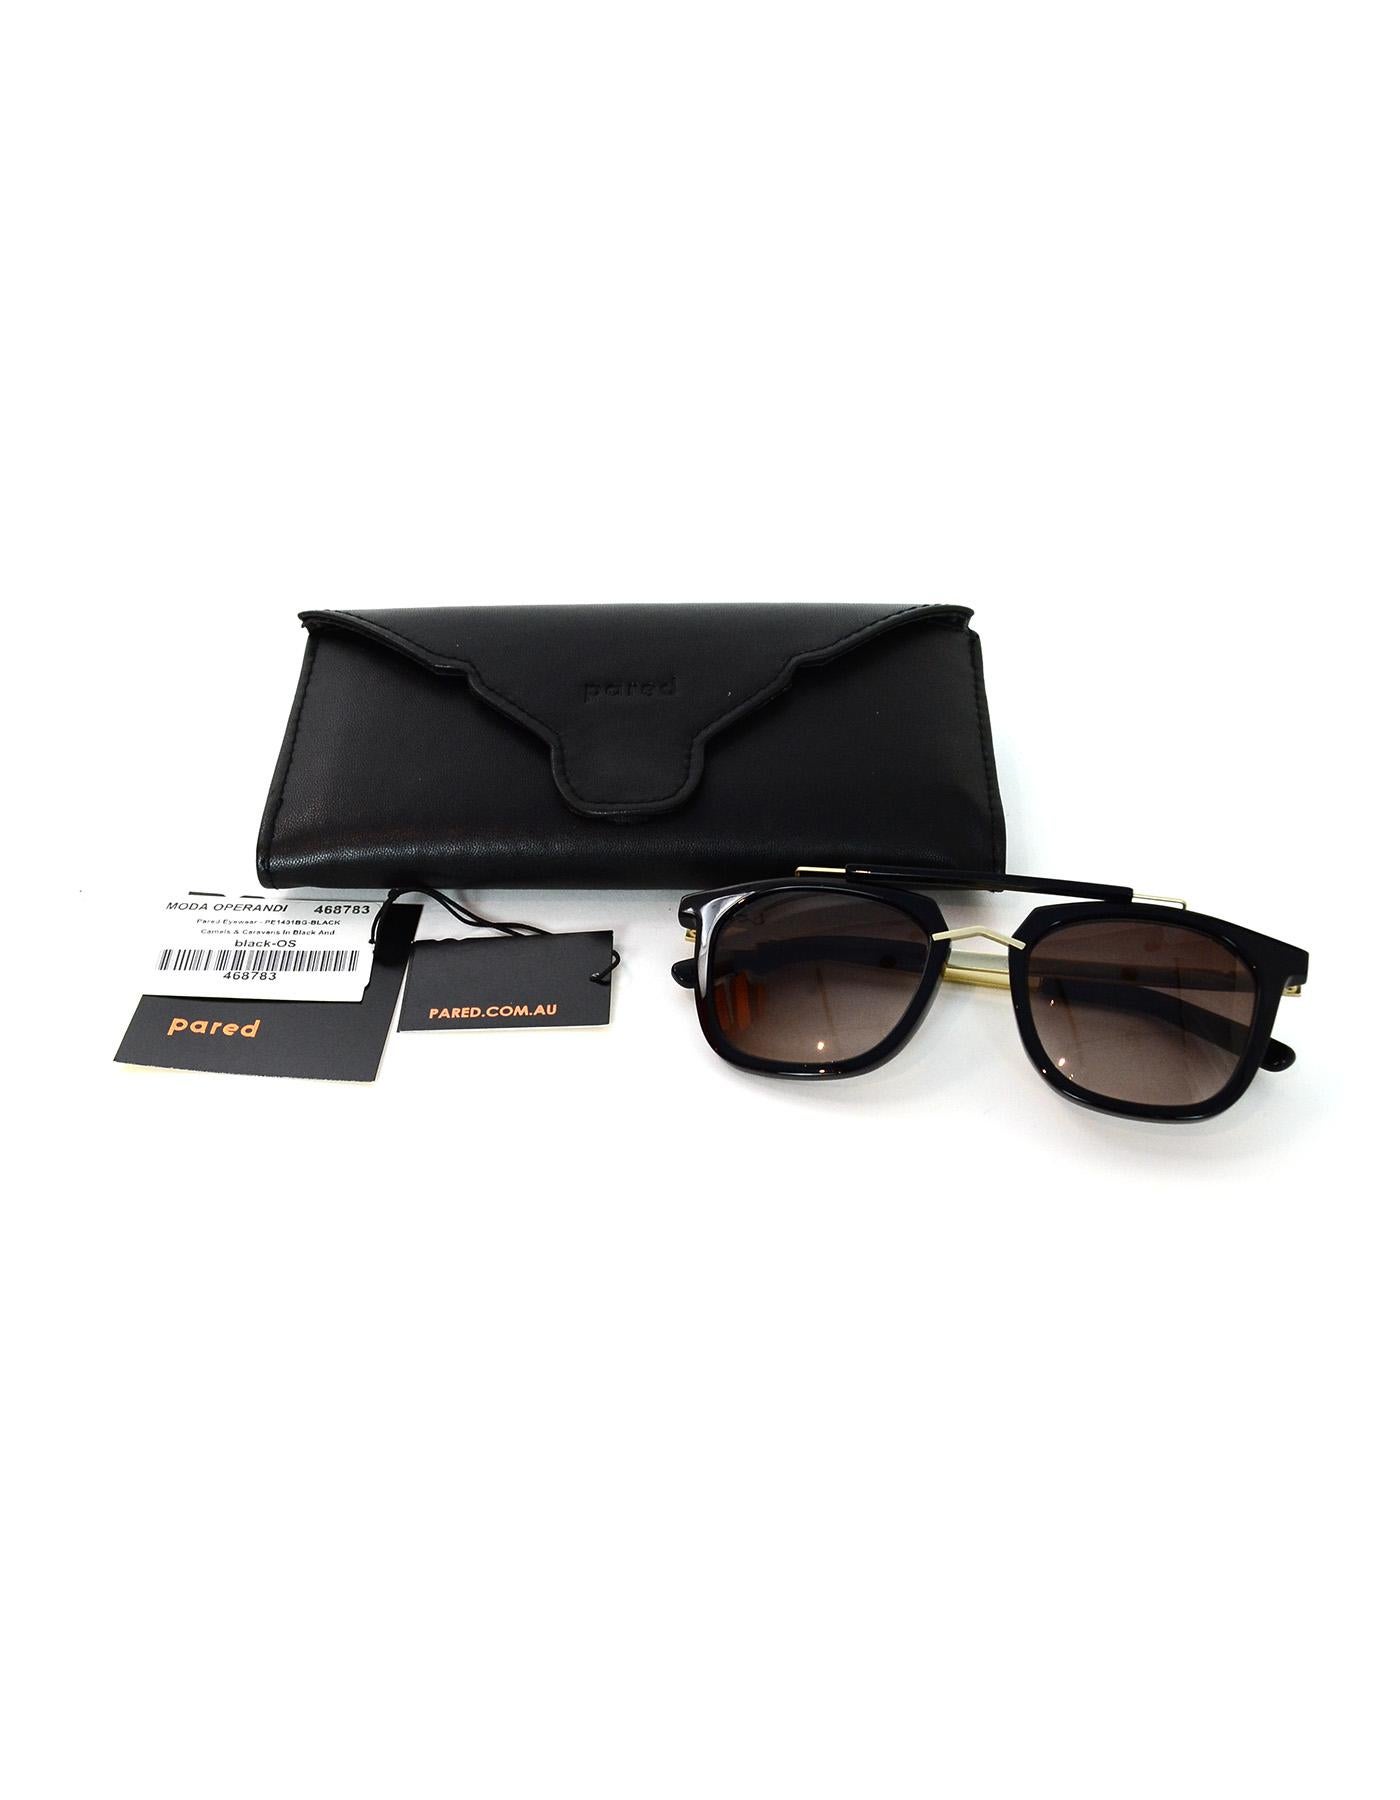 Pared Black/Gold Camels & Caravans Aviator Sunglasses W/ Brown Gradient Lenses

Made In: Australia 
Color: Black
Hardware: Goldtone
Materials: Resin and metal
Overall Condition: Excellent pre-owned condition 
Estimated Retail: $270 + tax
Includes: